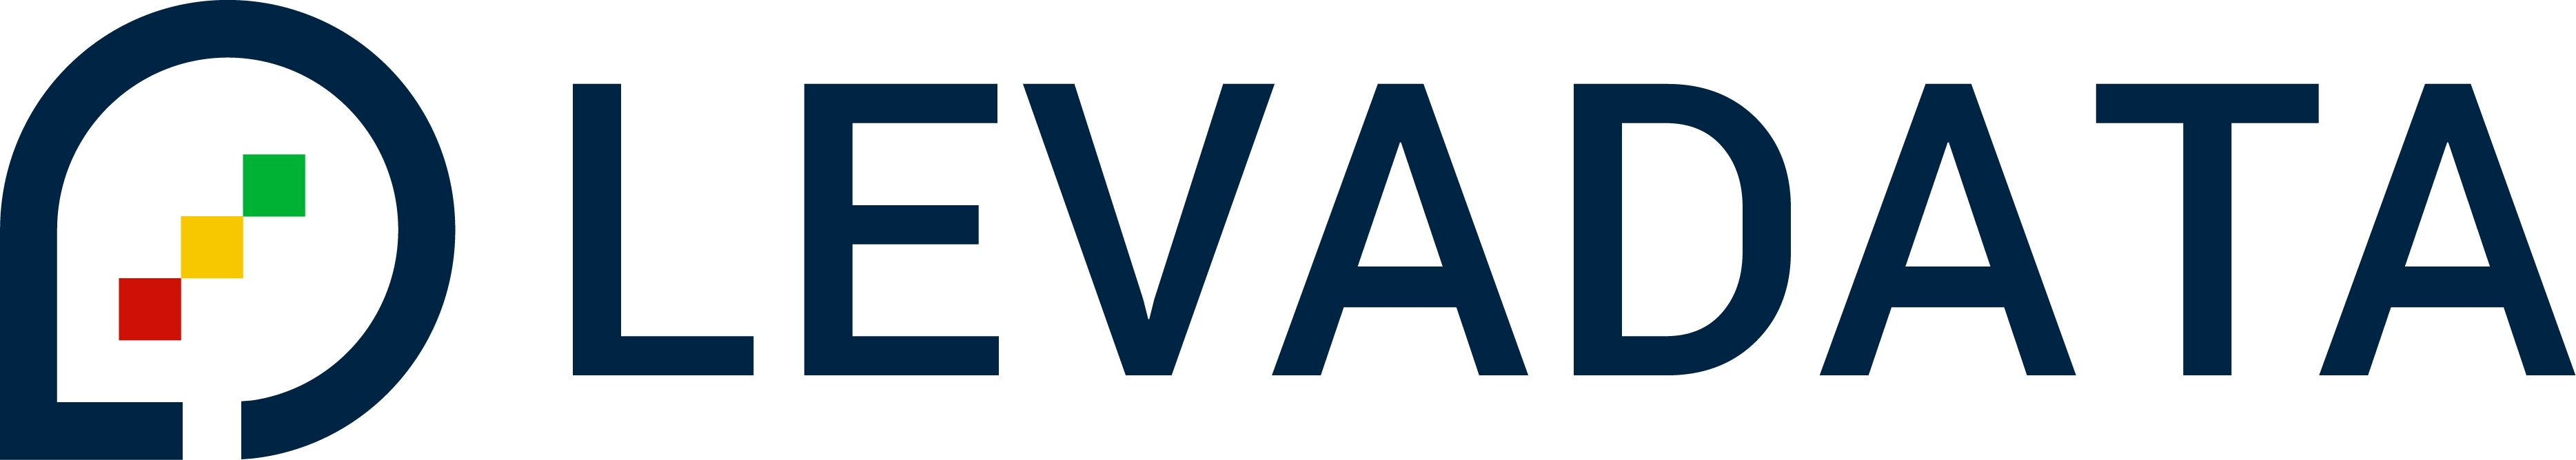 LevaData Introduces the World's First Suite of Supply Management Software |  Business Wire